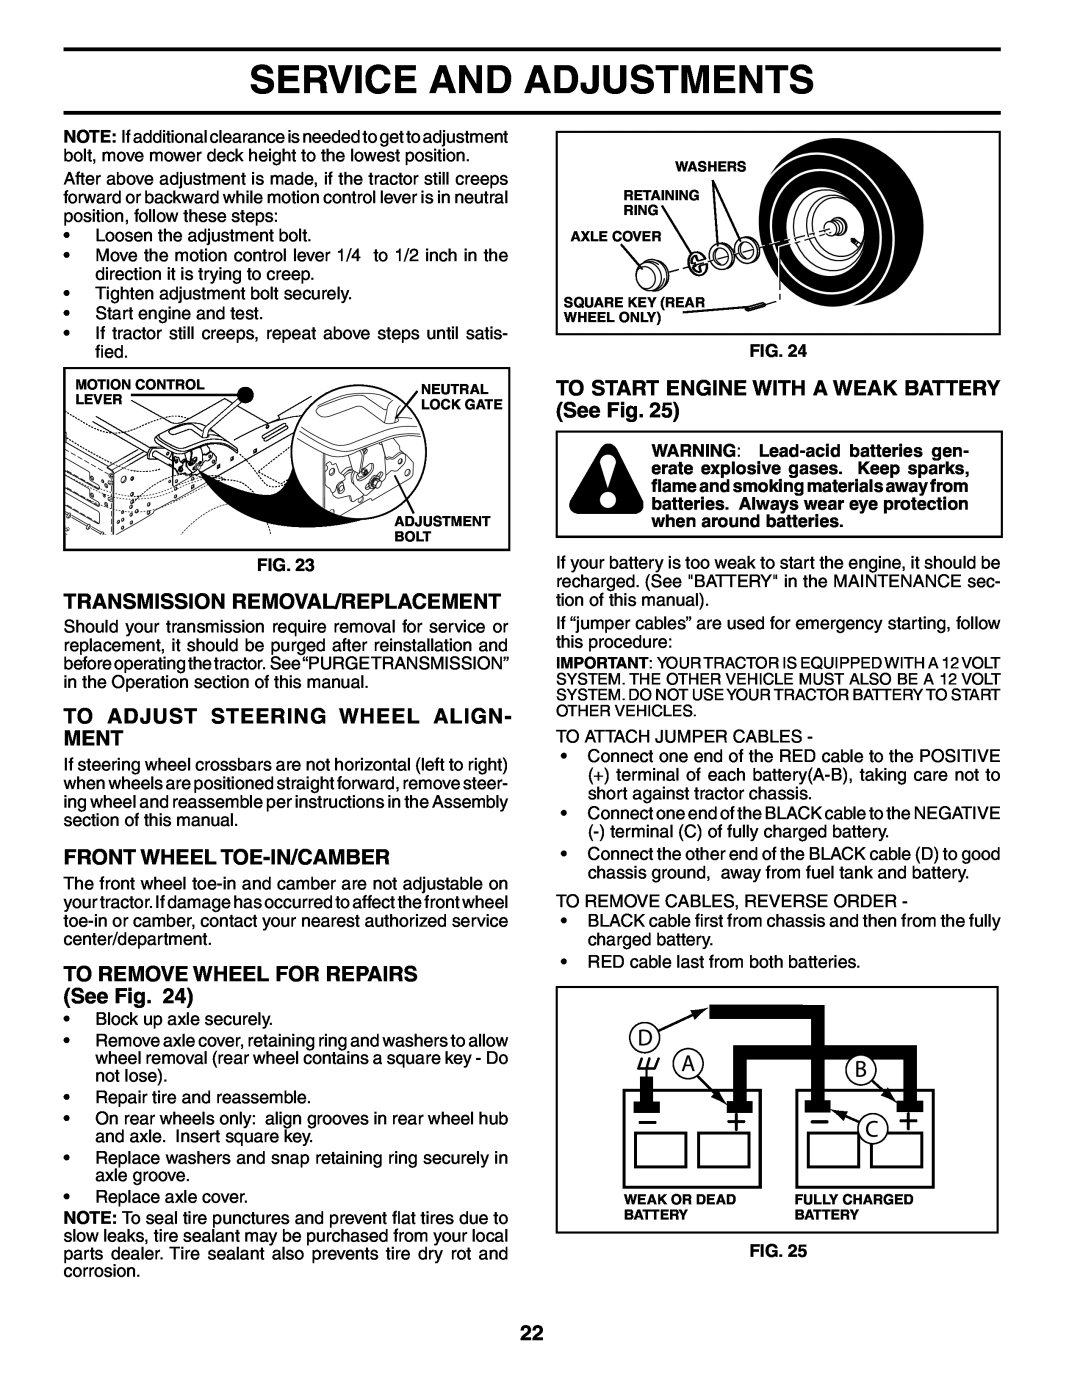 Ryobi 197788 manual Transmission Removal/Replacement, To Adjust Steering Wheel Align- Ment, Front Wheel Toe-In/Camber 